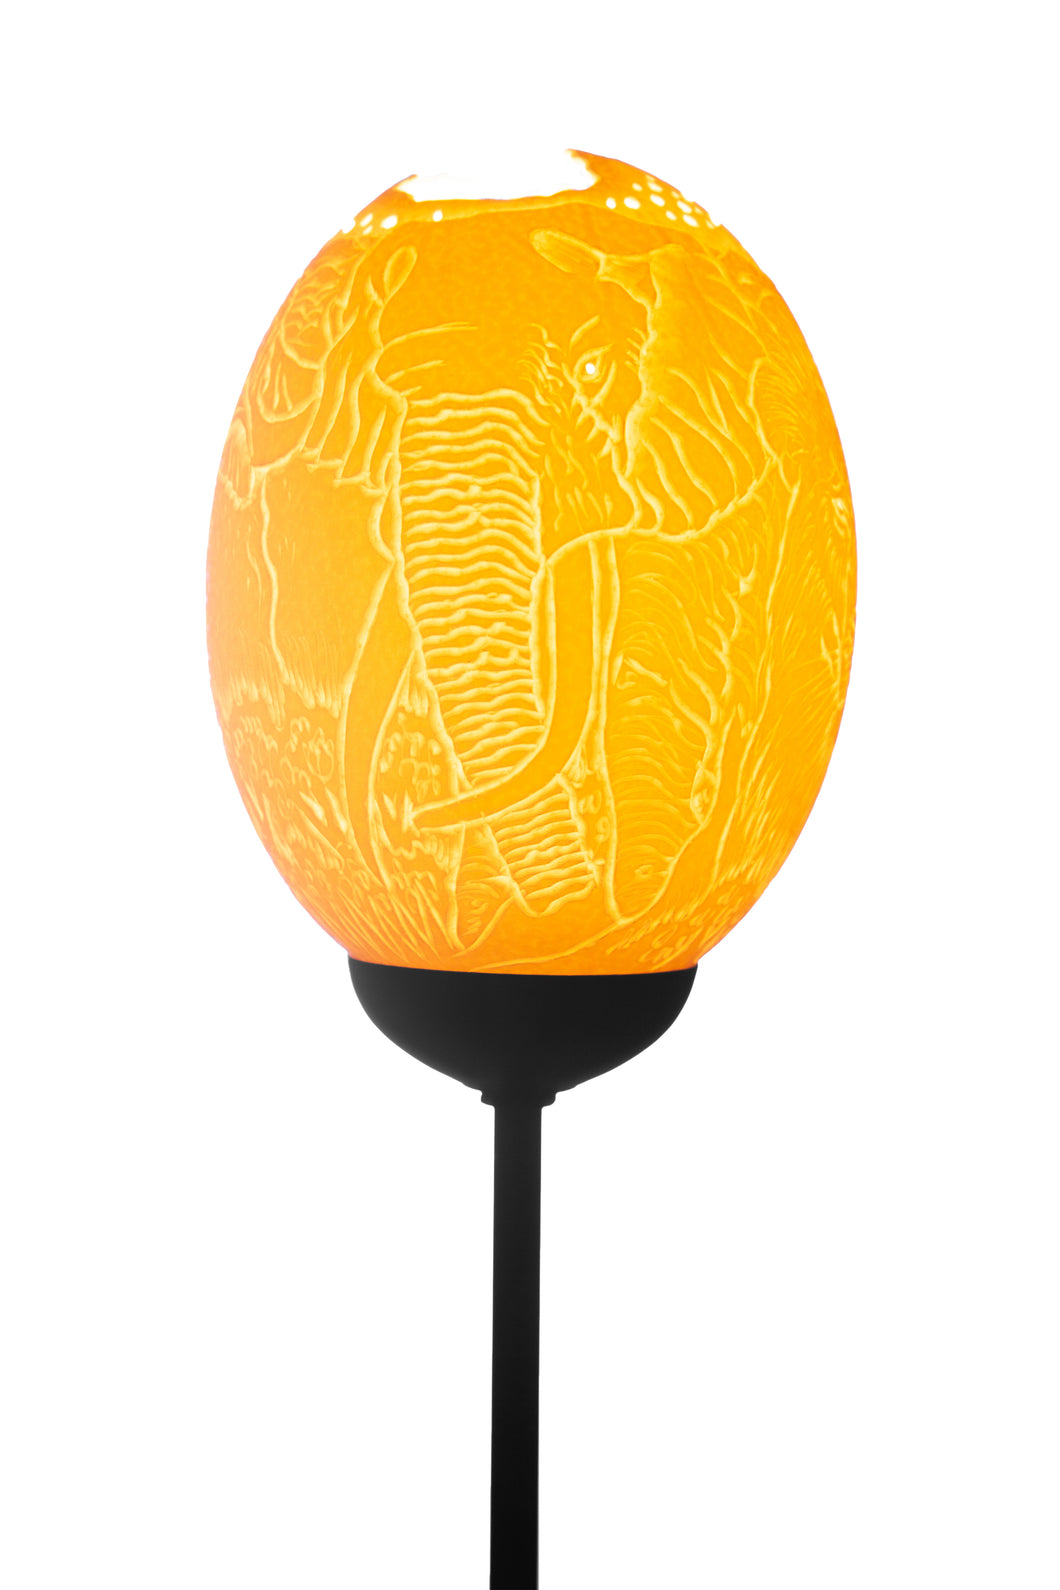 Big 5 & Africa themed ostrich egg lamp